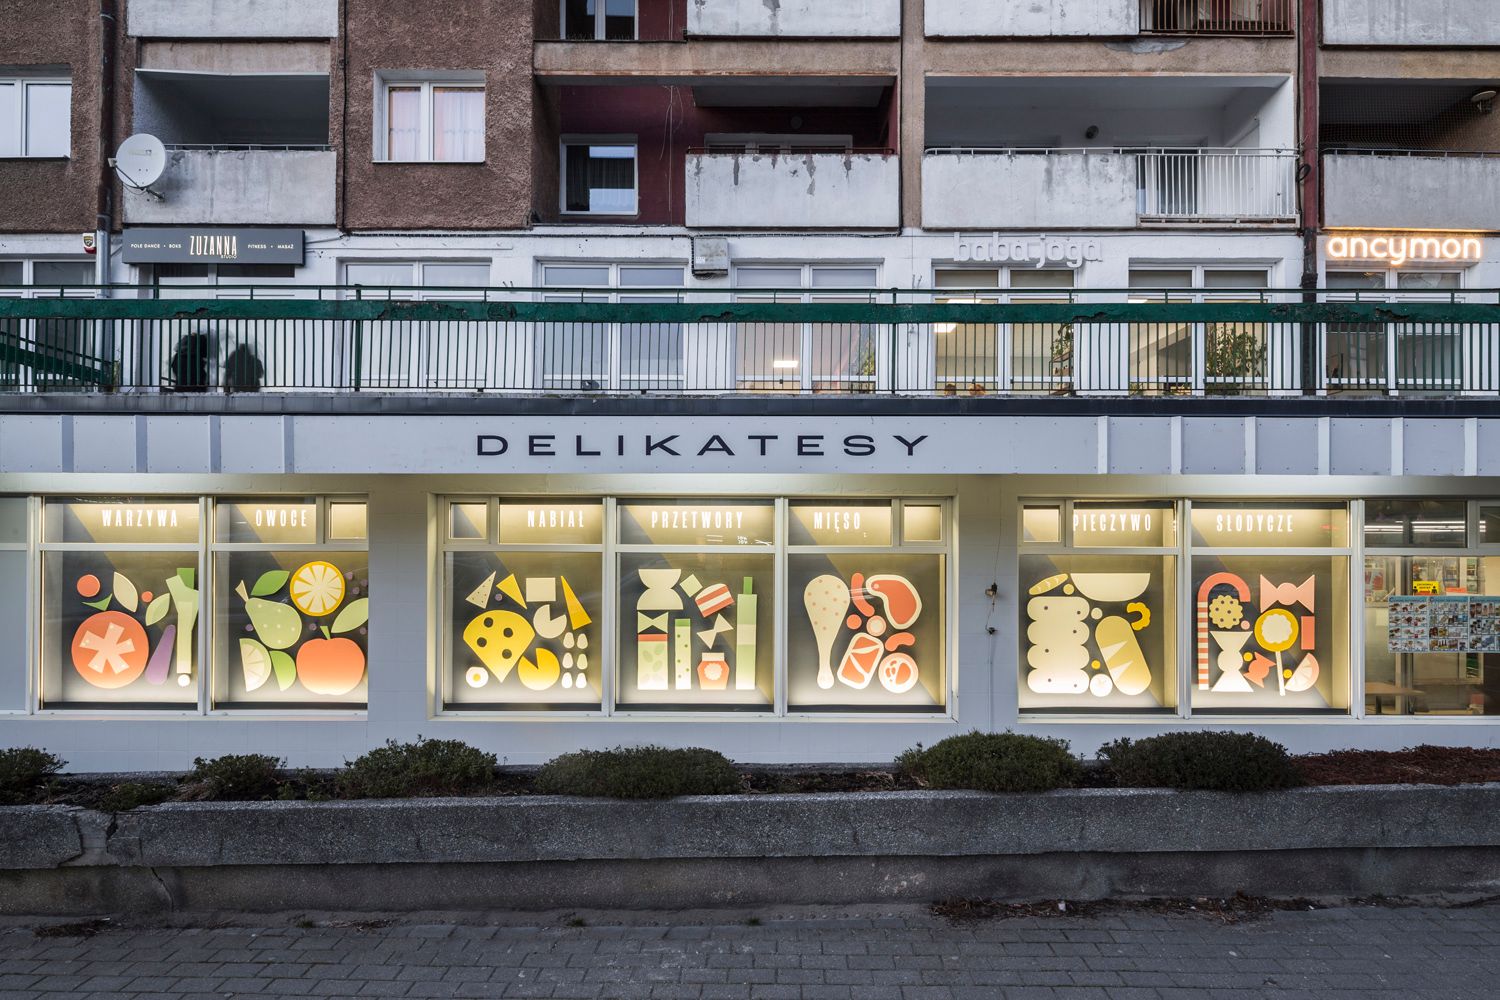 Contemporary and fresh, but not too exclusive—Gdynia’s iconic delicatessen storefront was rethought by Traffic Design